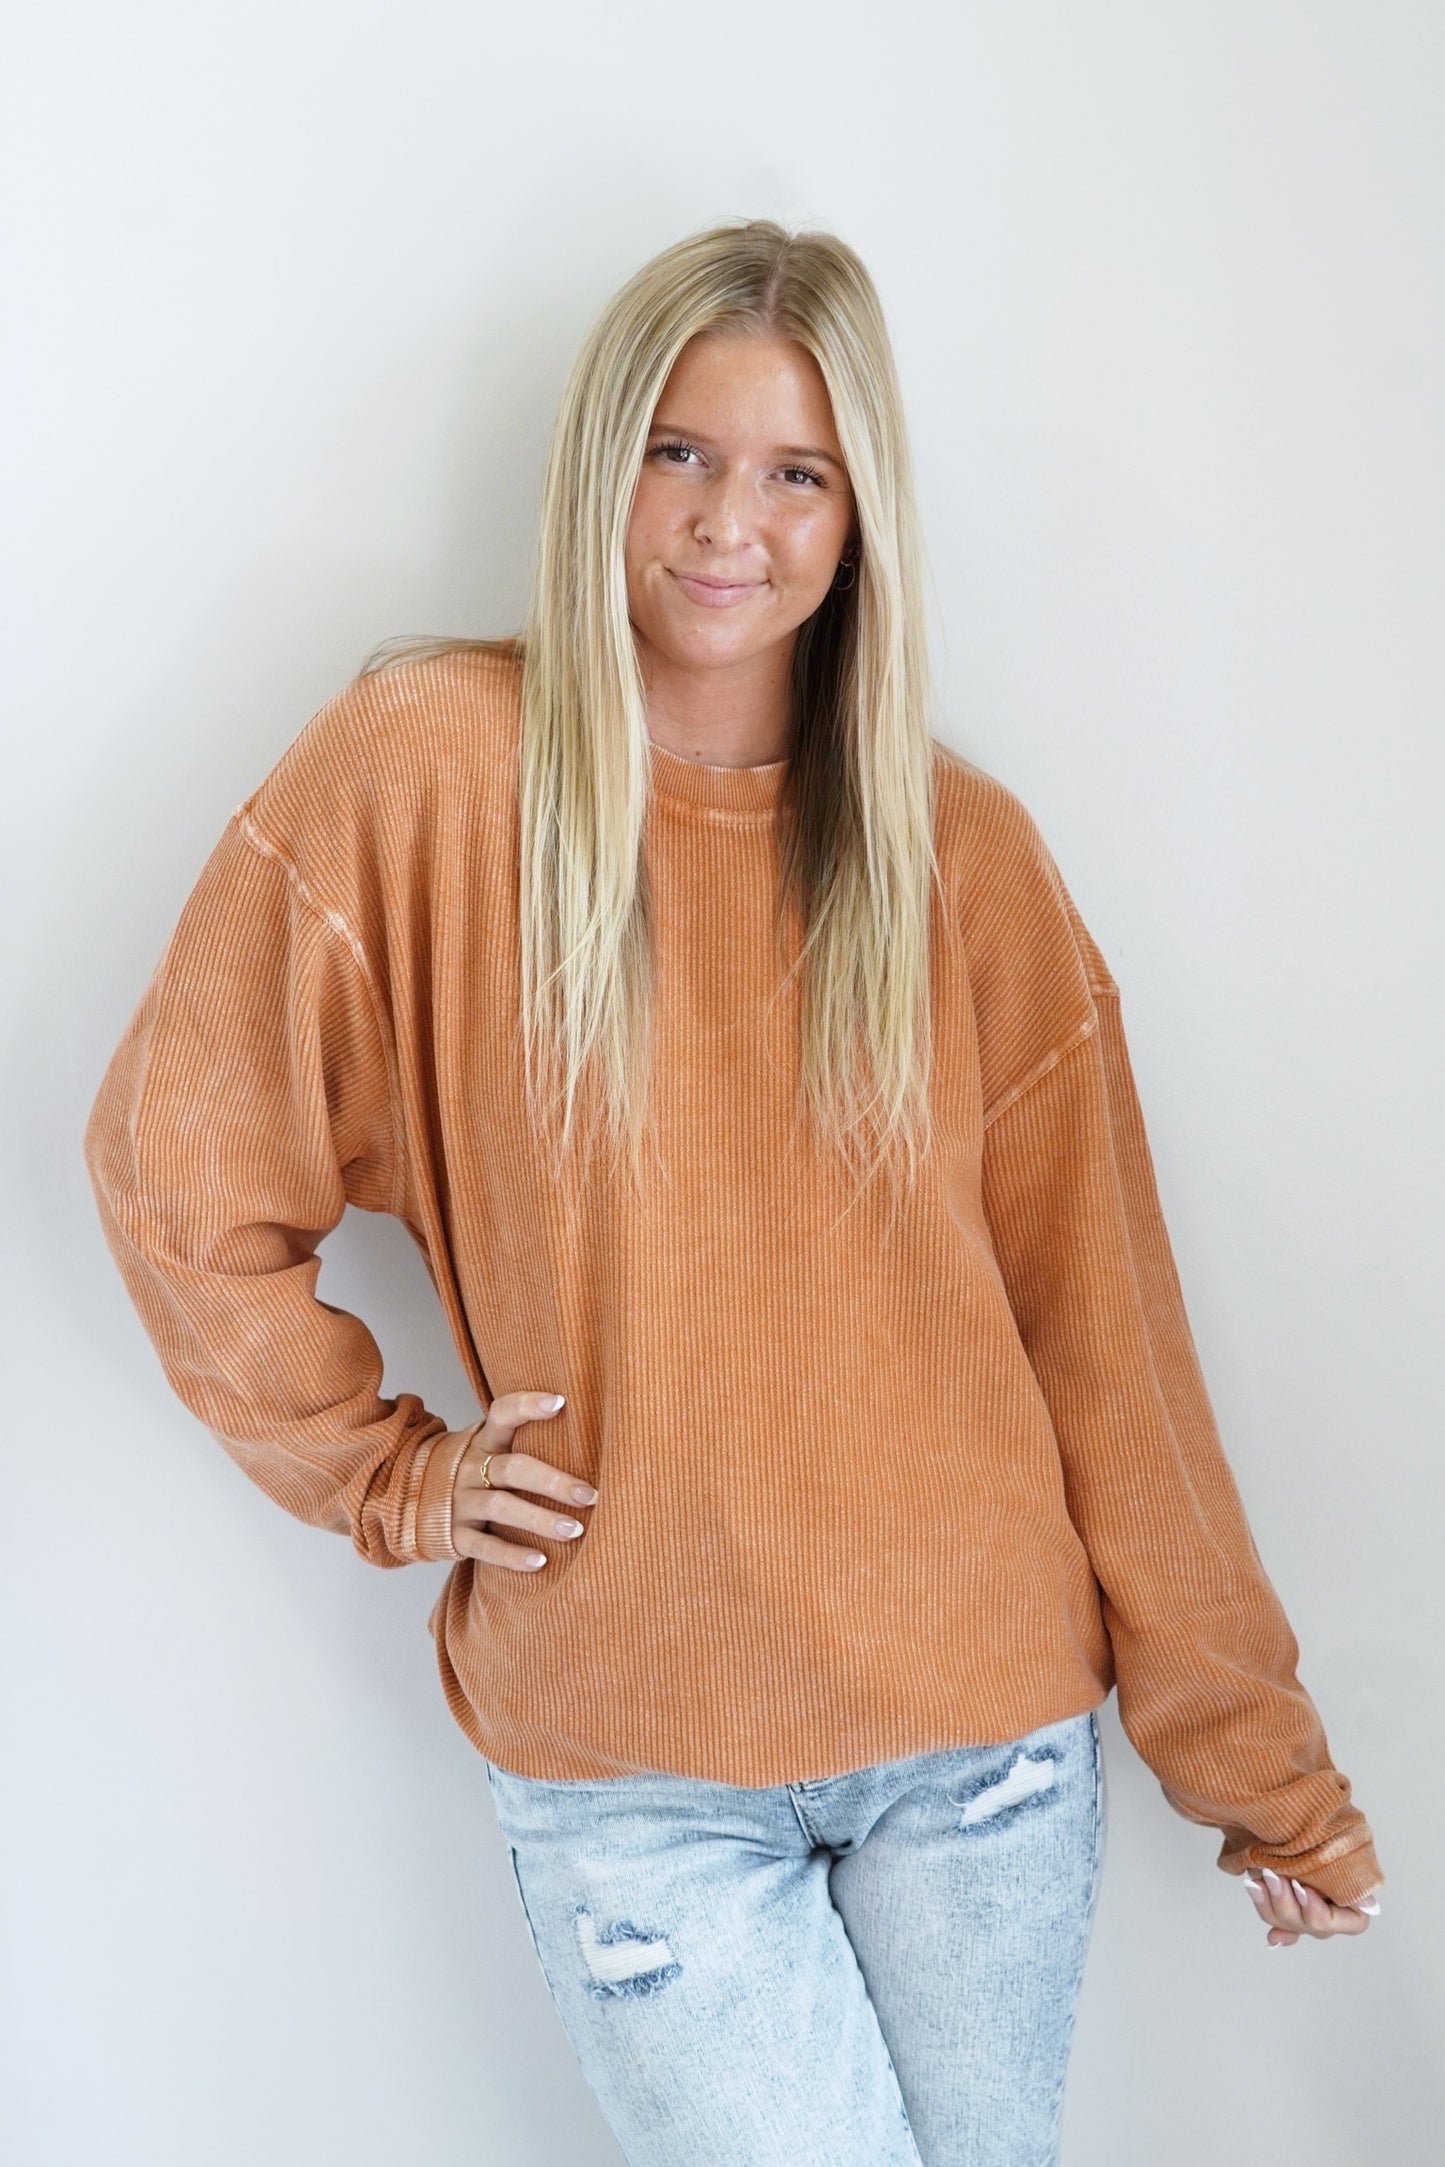 Calla Corded Crew Everyday Sweatshirt Crew Neckline Long Sleeve Corded Material Colors: Orange Full Length Relaxed Fit 100% Cotton